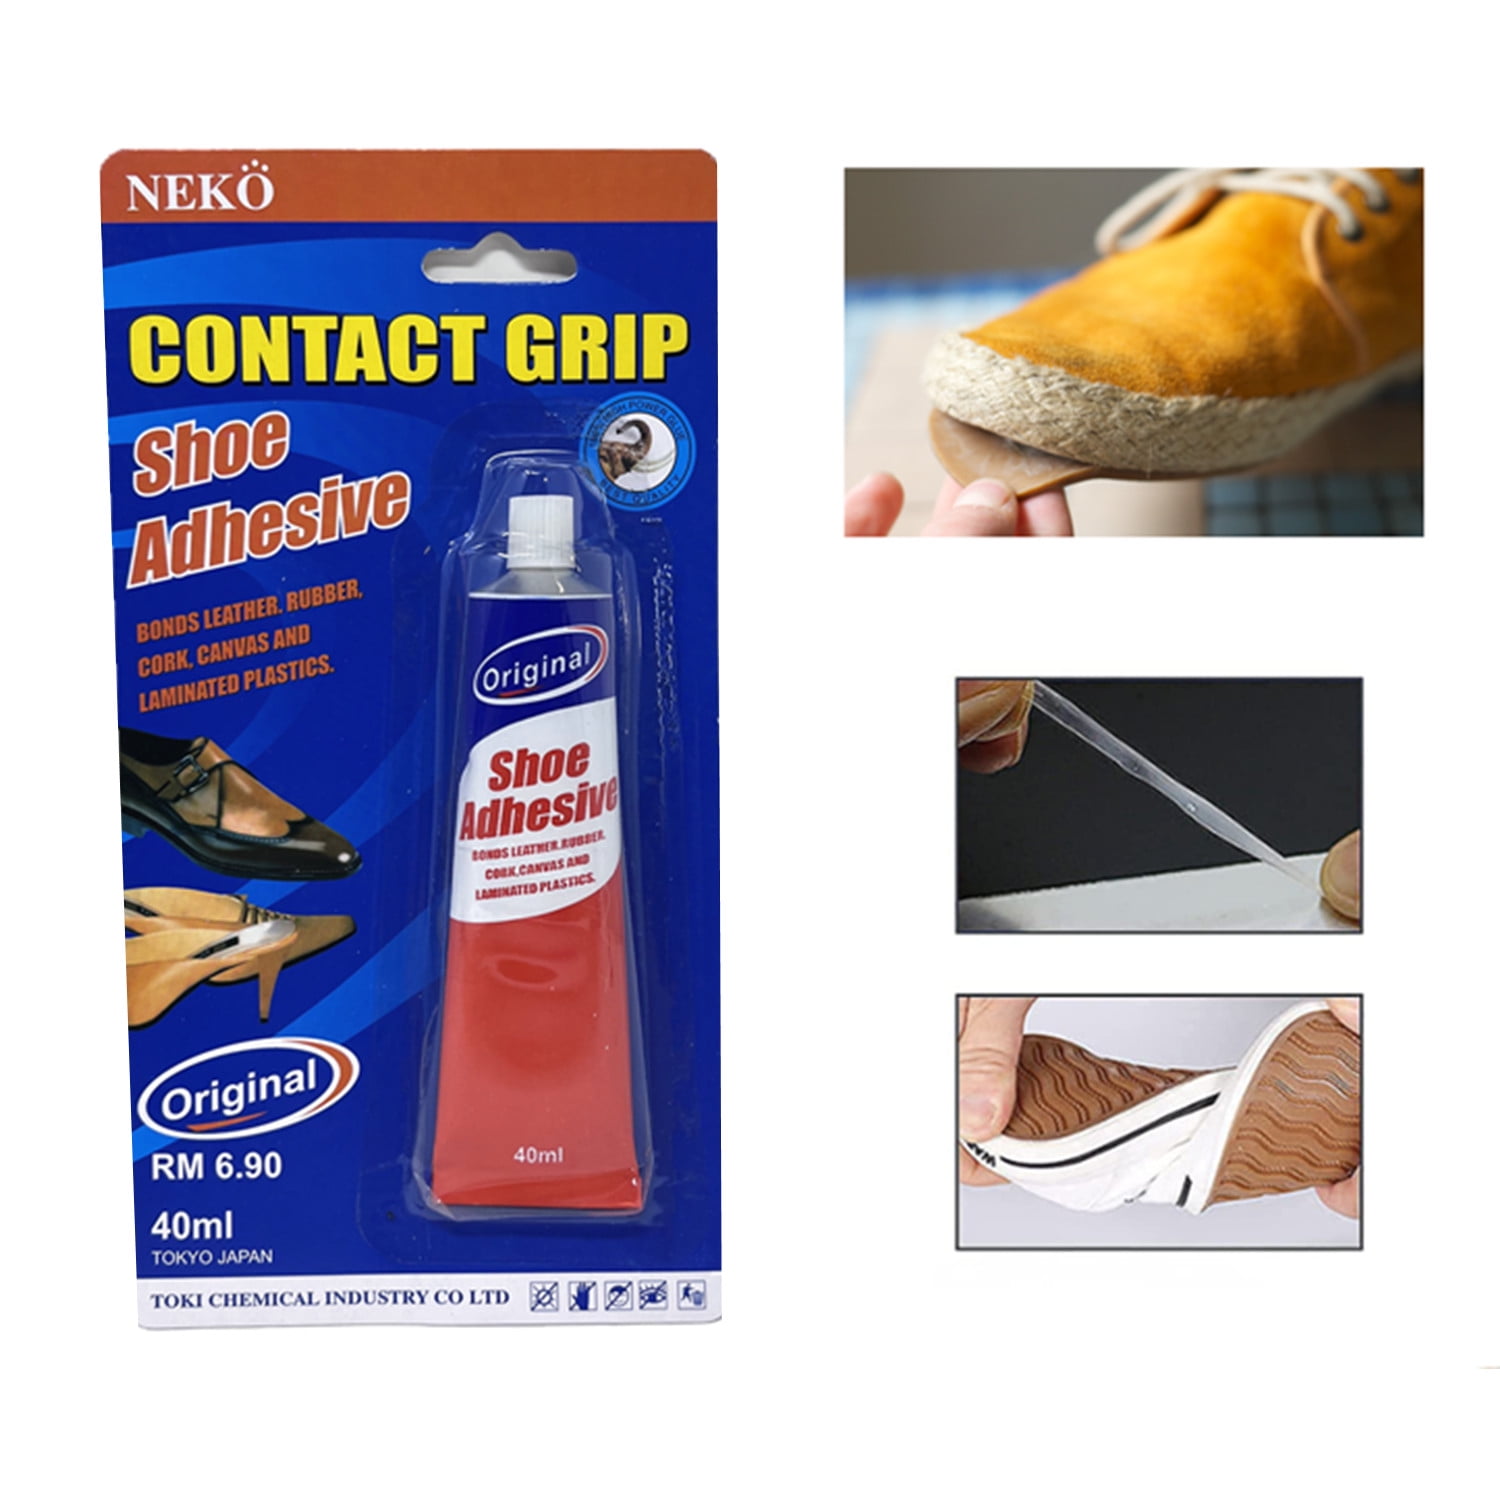 Invisible Leather Repair Glue, 30ml/50ml Leather Glue for Sofa, Leather Scratch Repair Glue, Repair Adhesive Flexible Liquid, Leather Maintenance